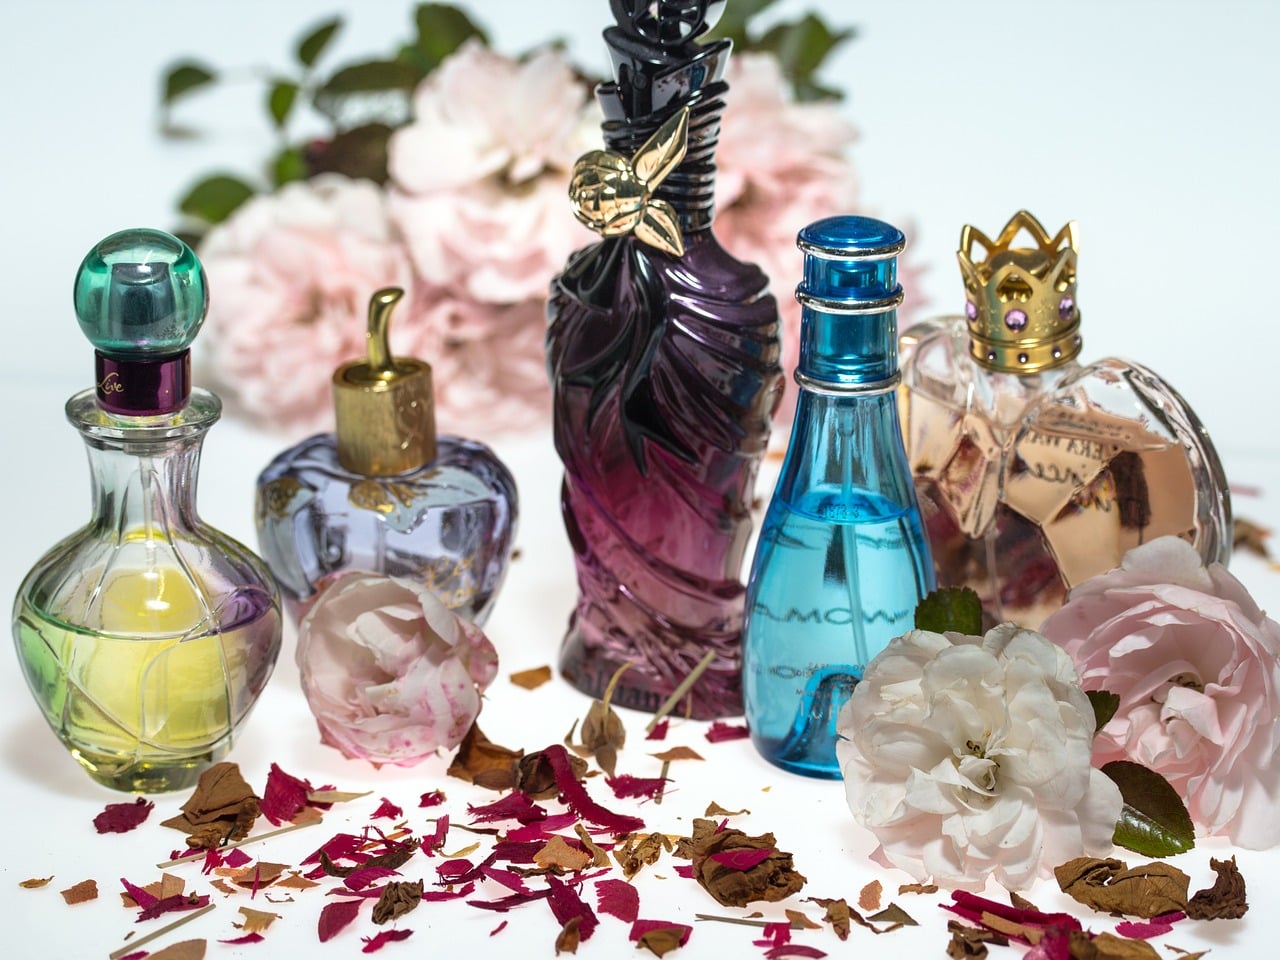 Shumukh The World's Most Expensive Perfume